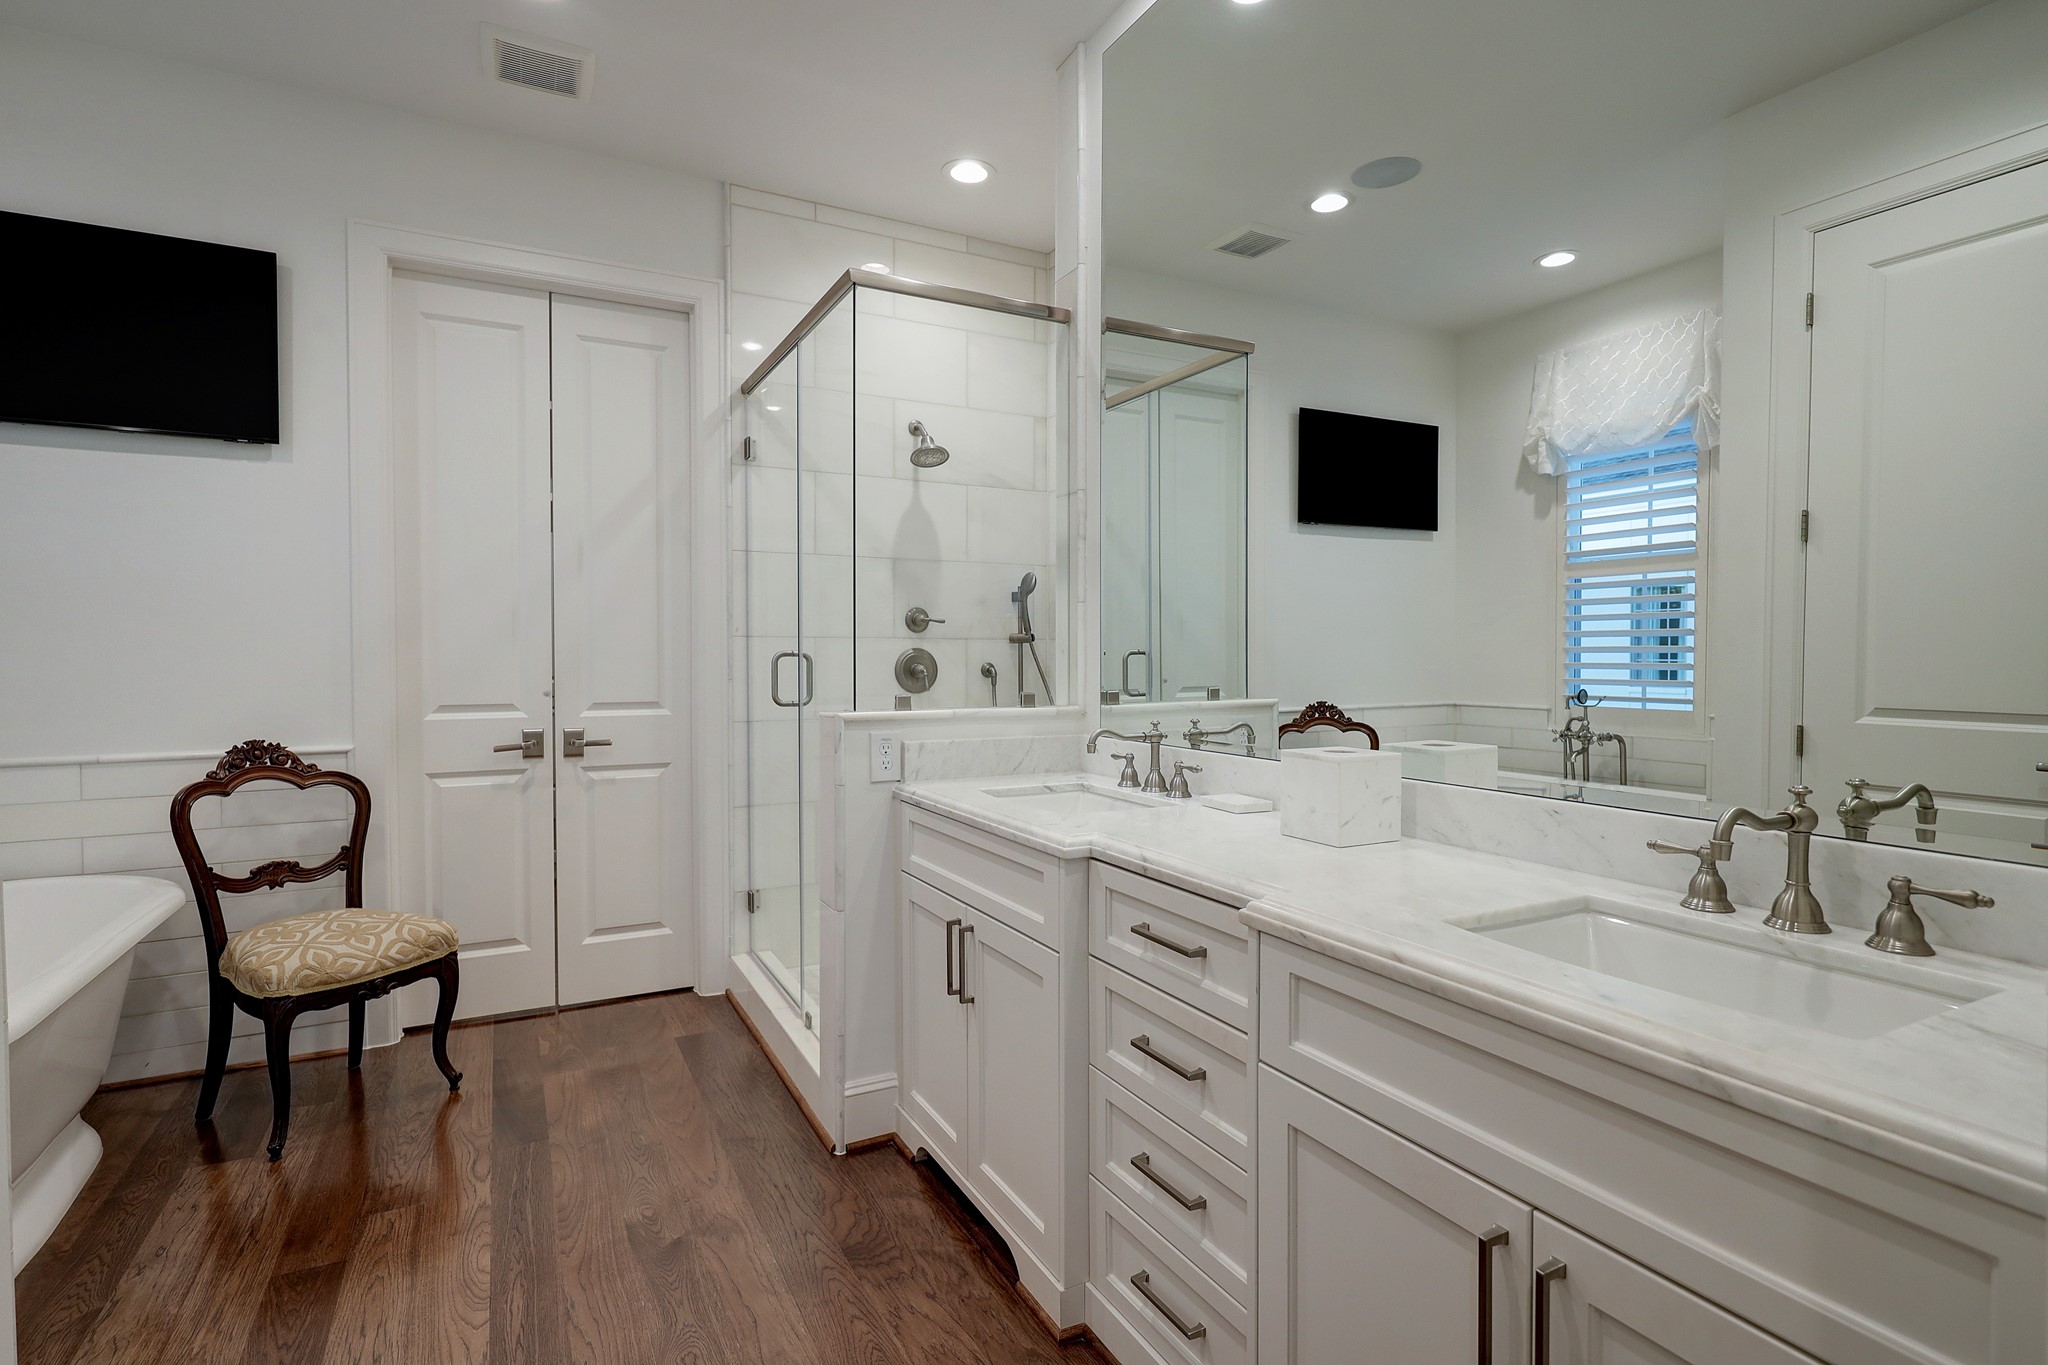 An oasis of its own, the primary bath features marble counters with dual sinks, an Albert & Victoria free standing soaking tub with marble surround and plantation shutters, and a dual-head walk-in shower with marble surround, floor, and seat.